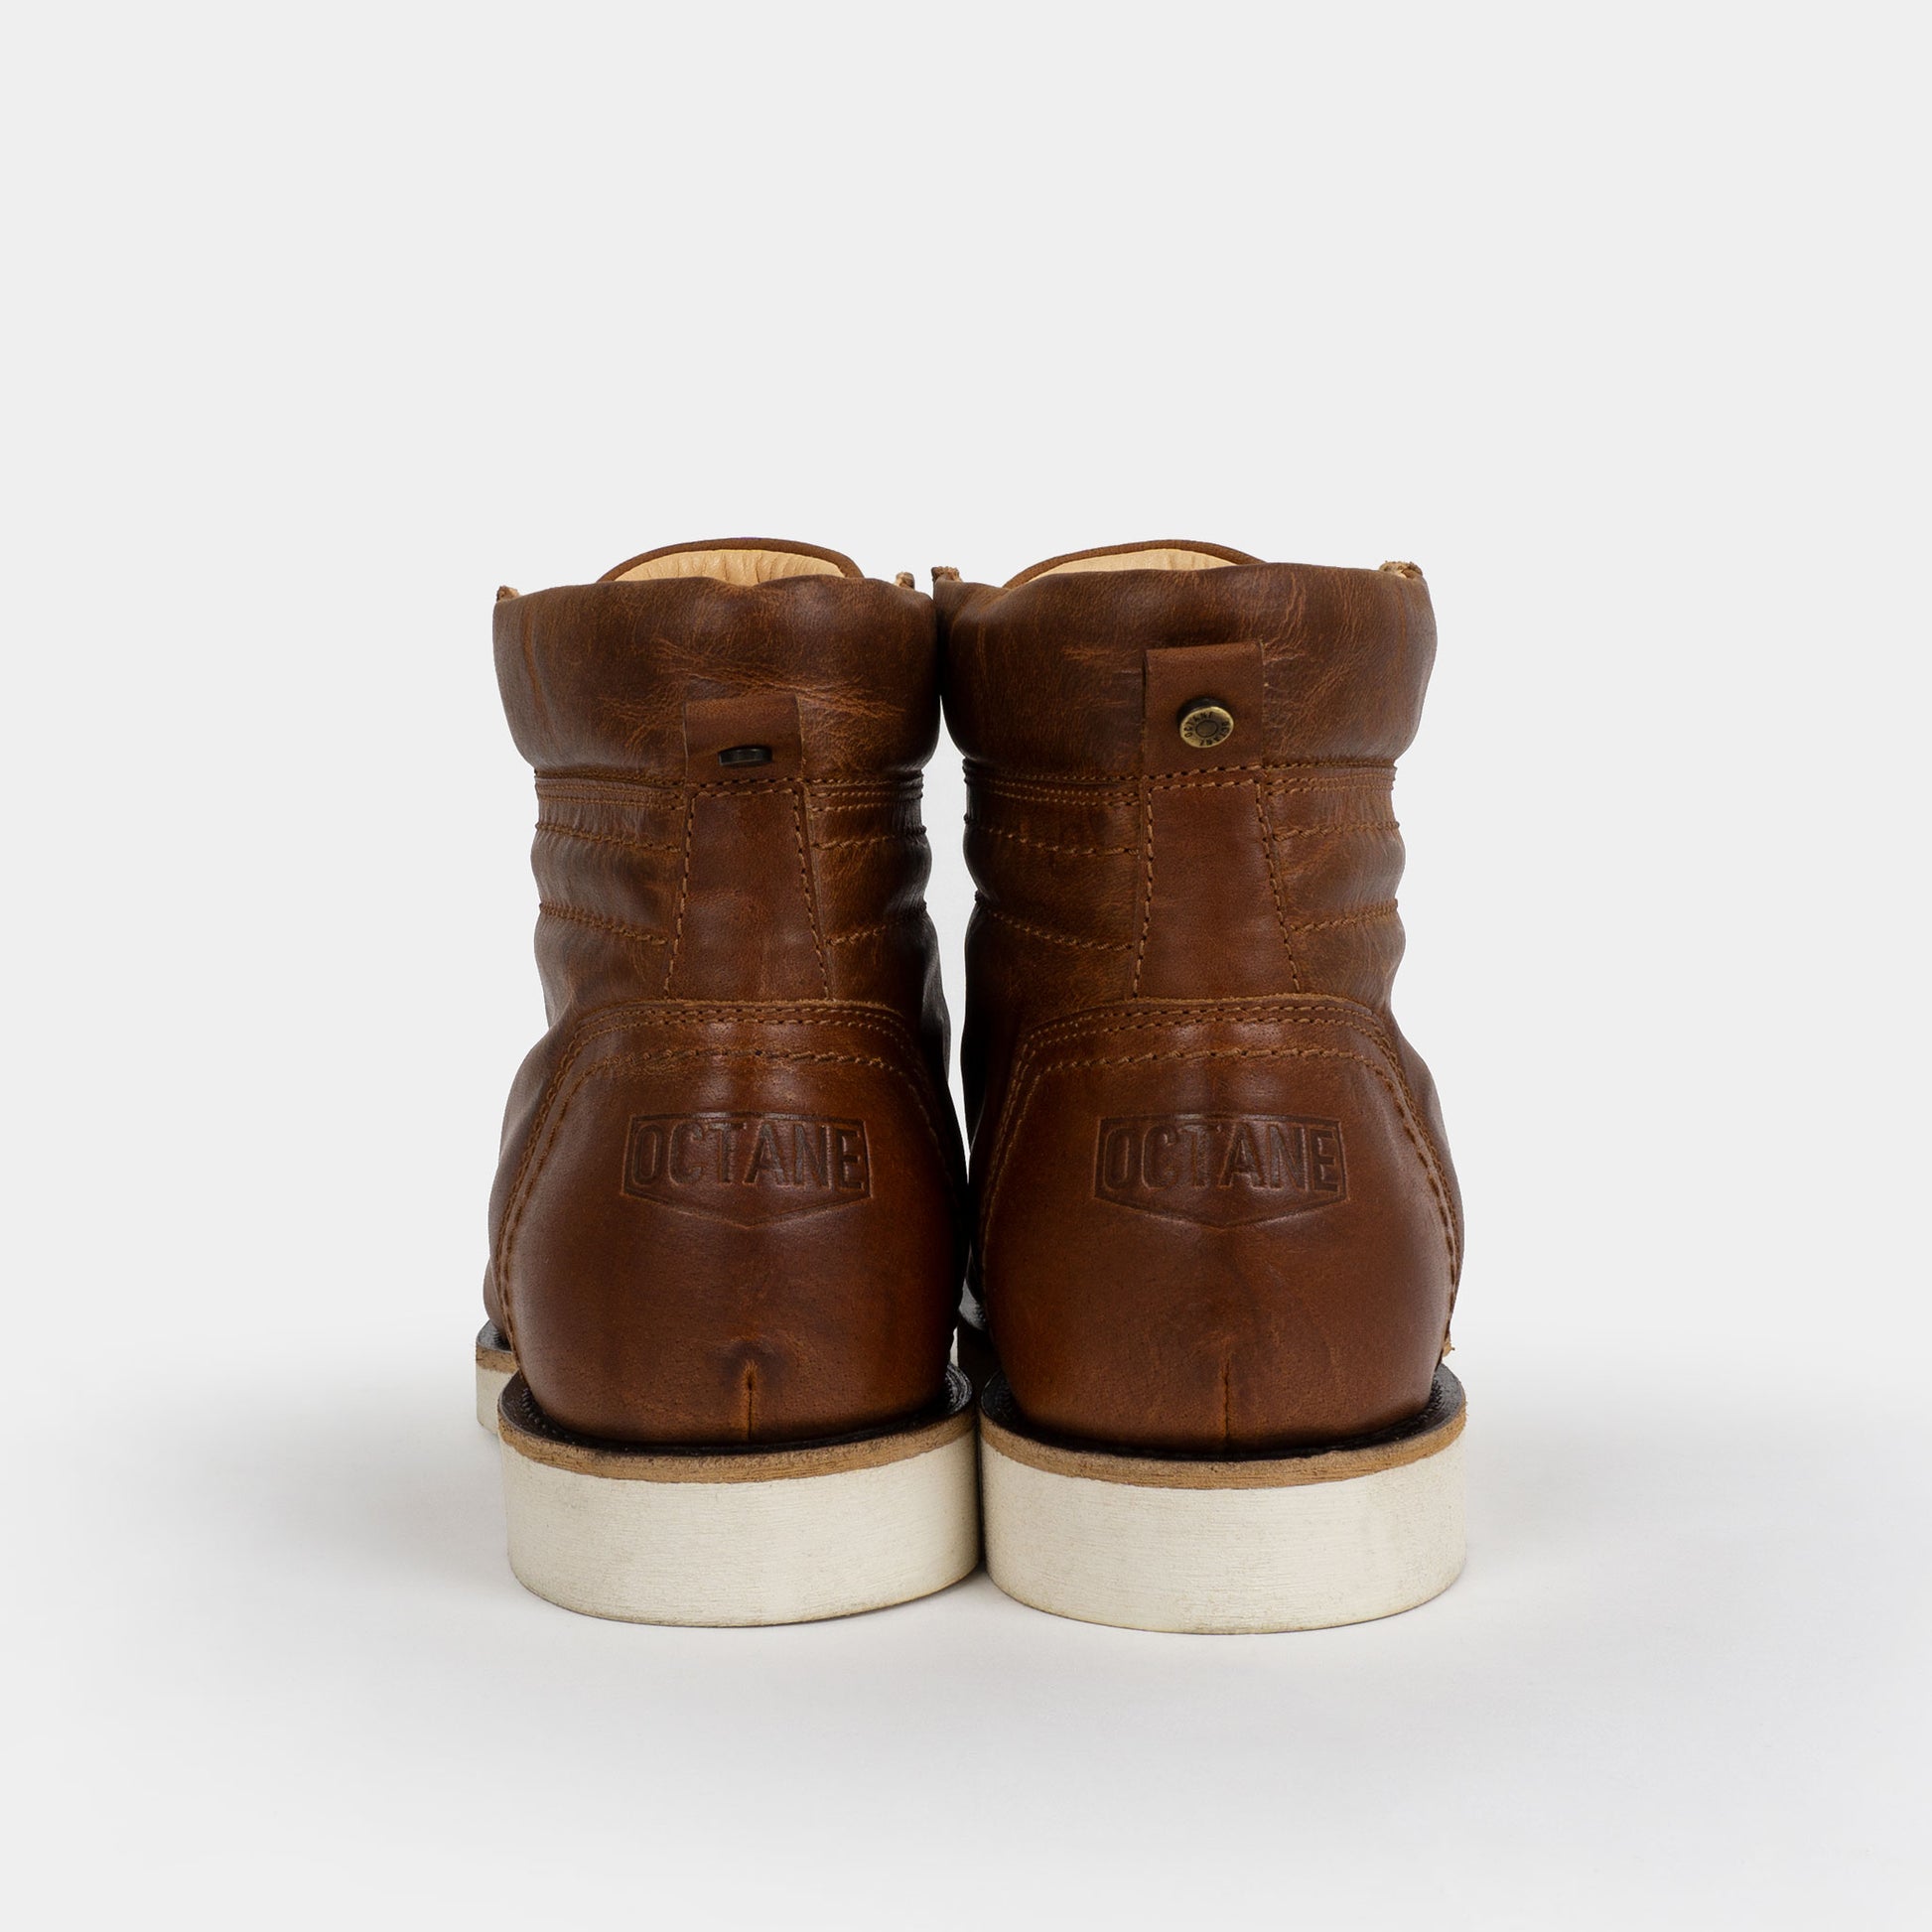 MT-622 moc toe leather boots in cognac